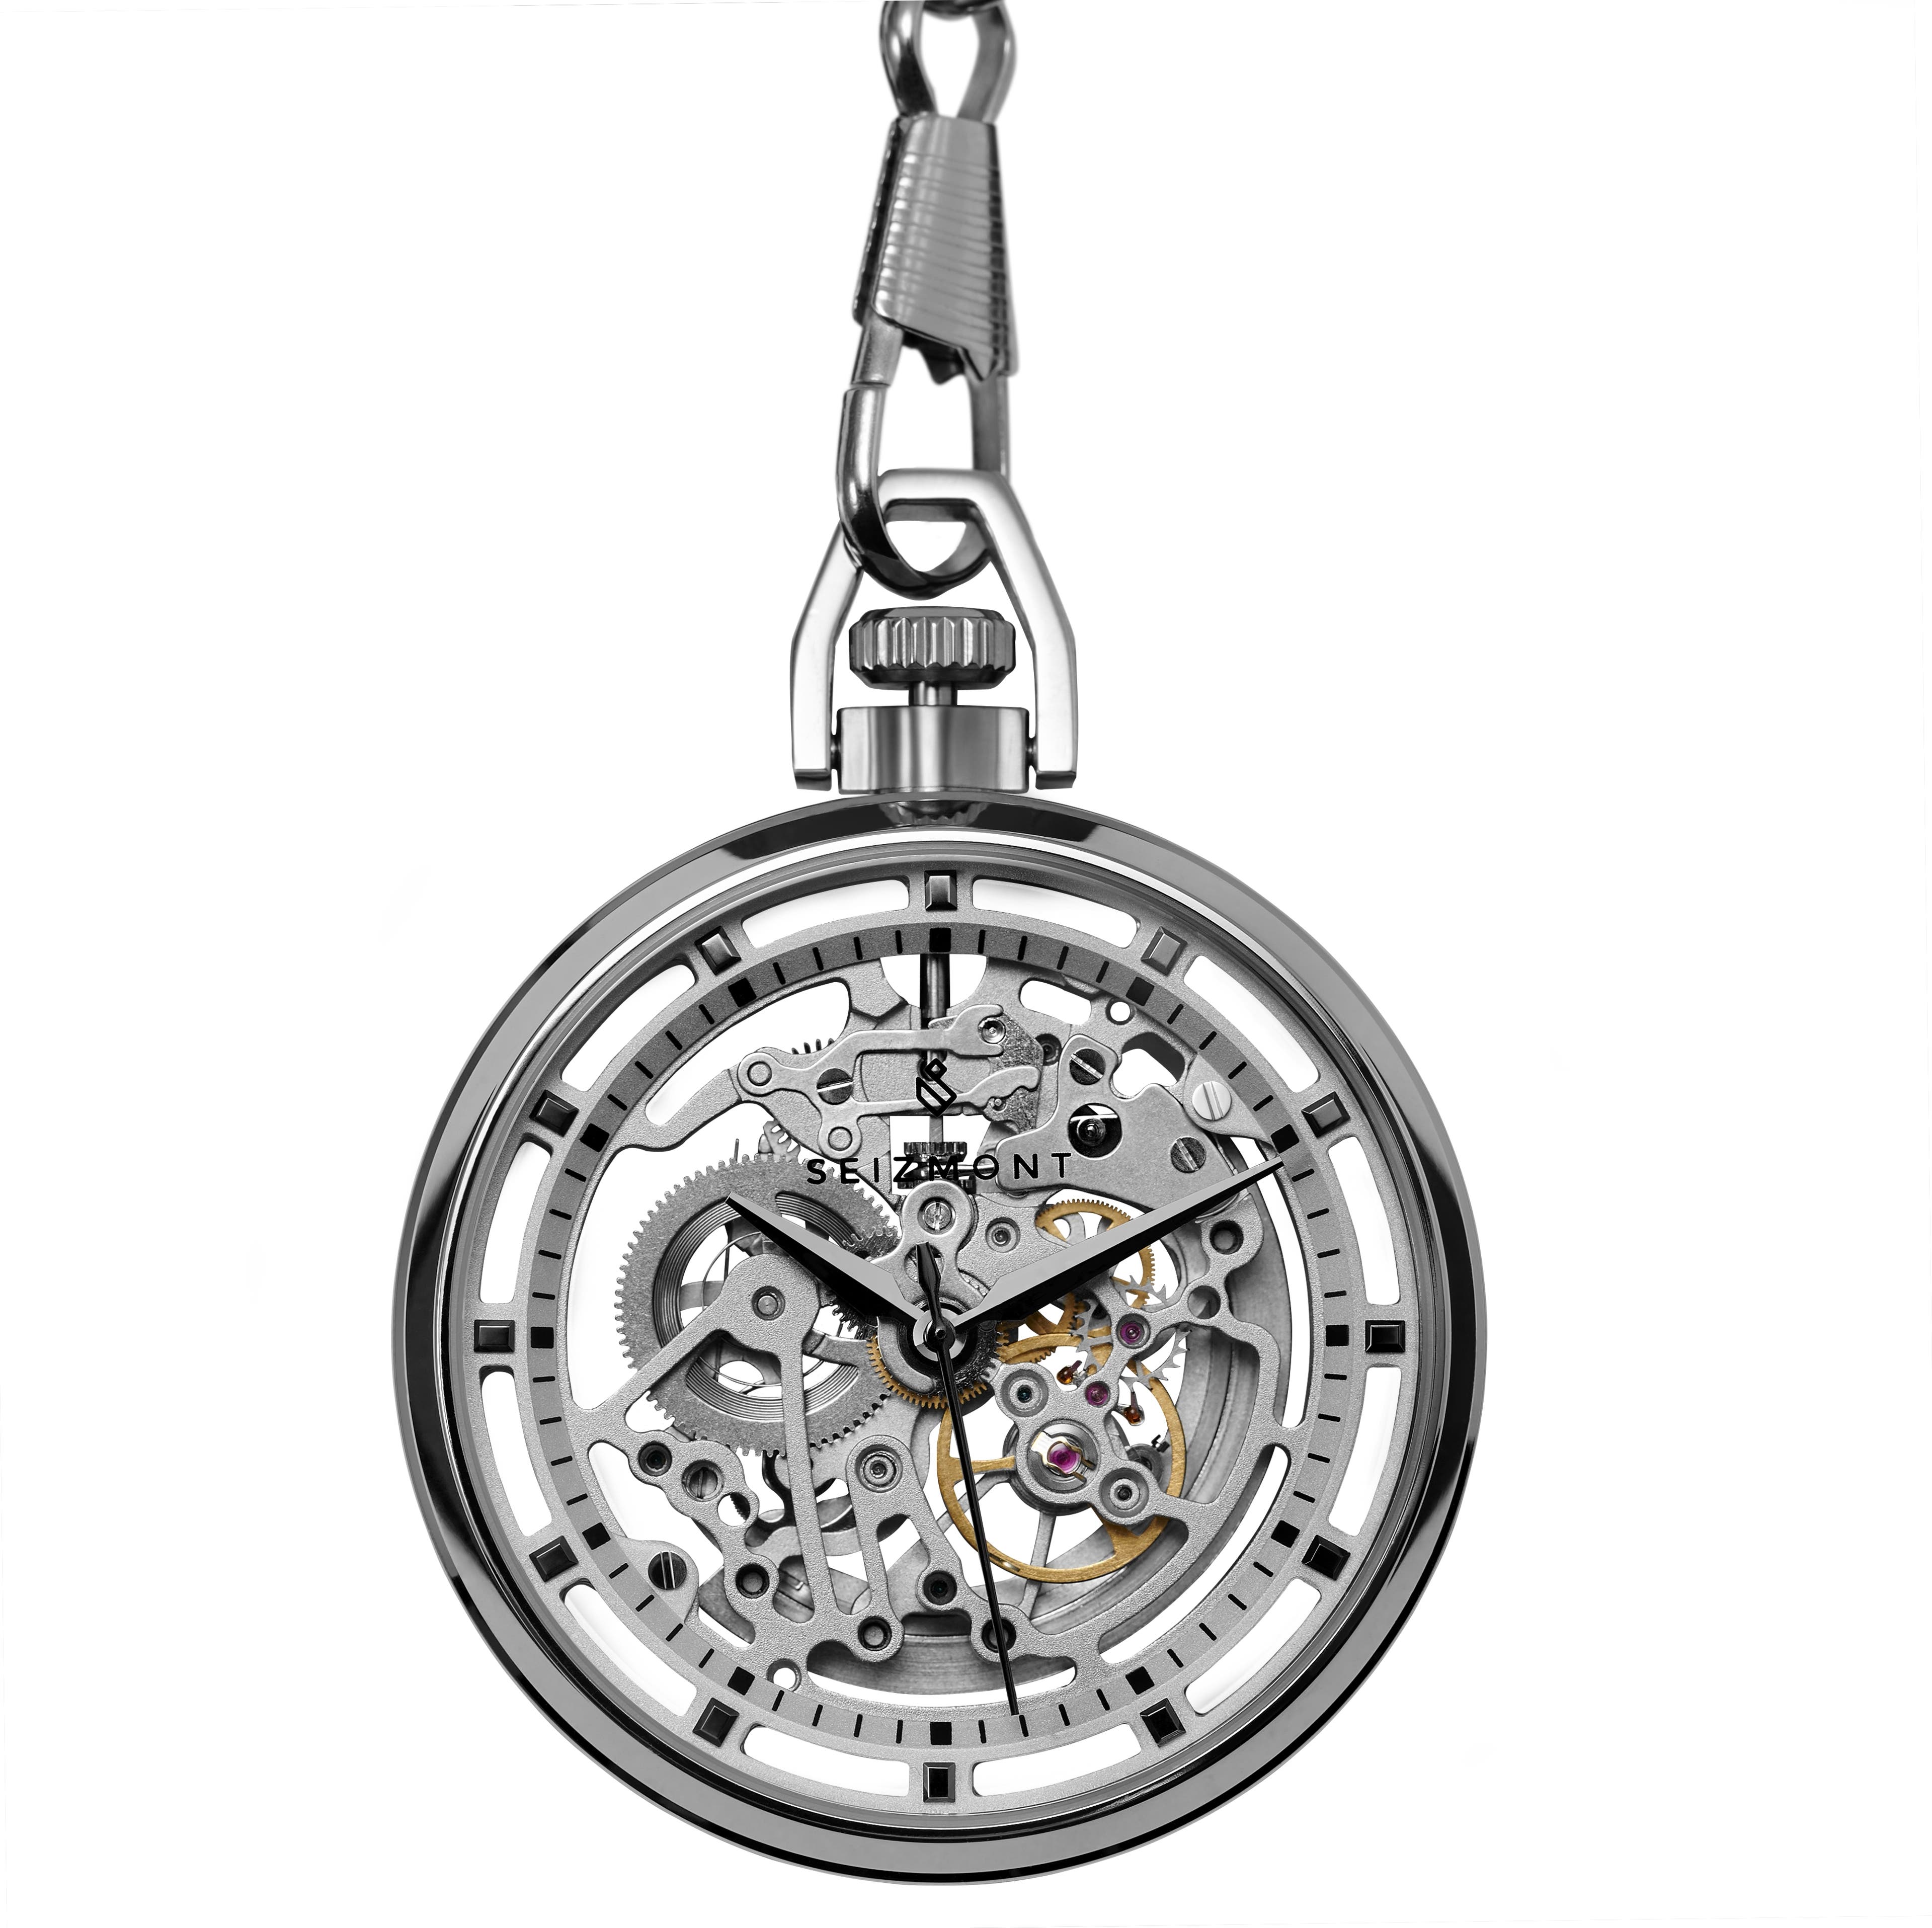 Agito | Silver-Tone Stainless Steel Skeleton Pocket Watch